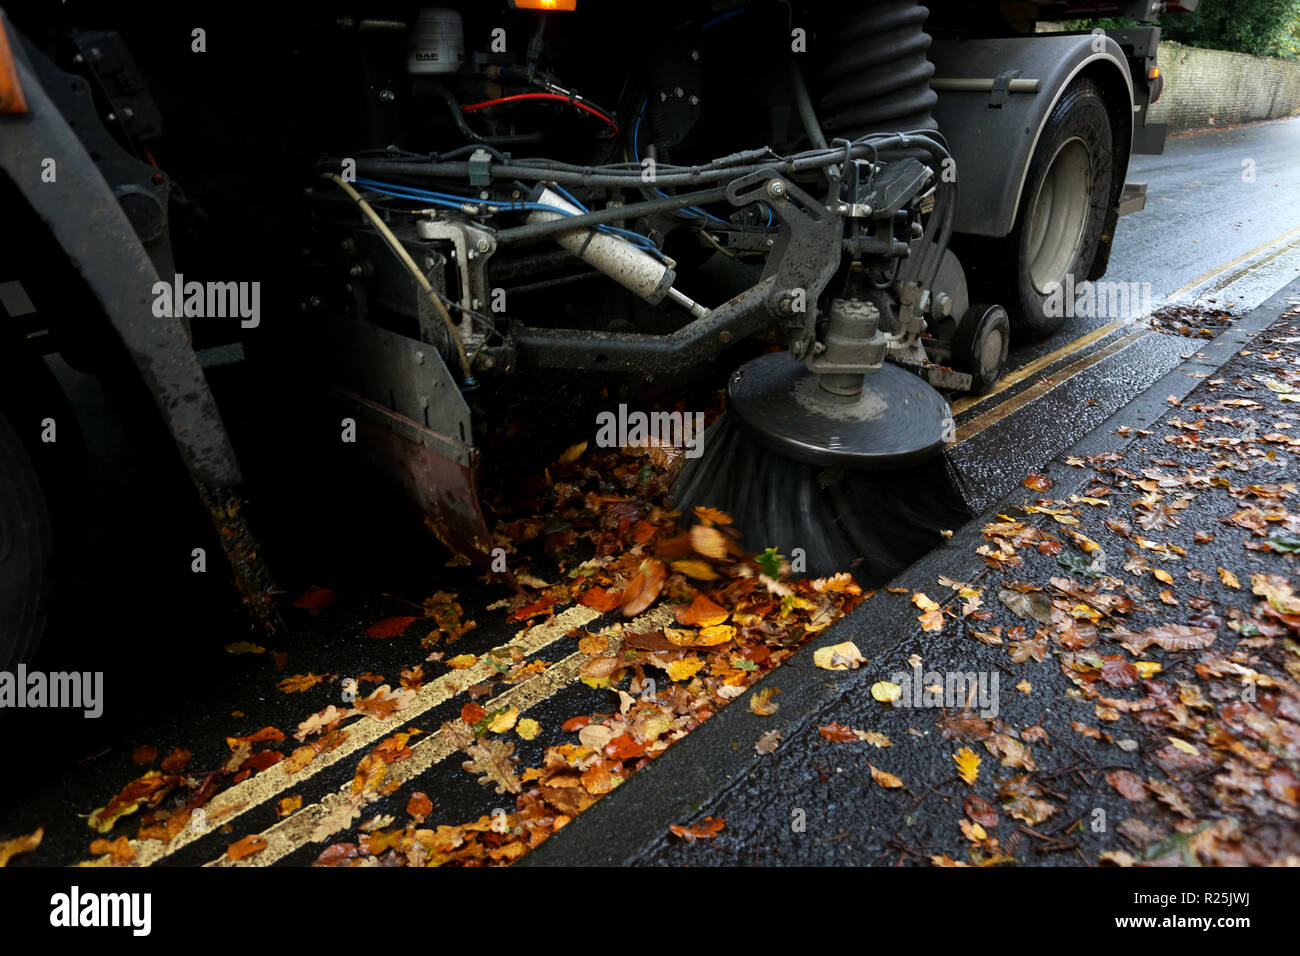 A council road sweeper pictured cleaning up leaves along the road in Chichester, West Sussex, UK. Stock Photo